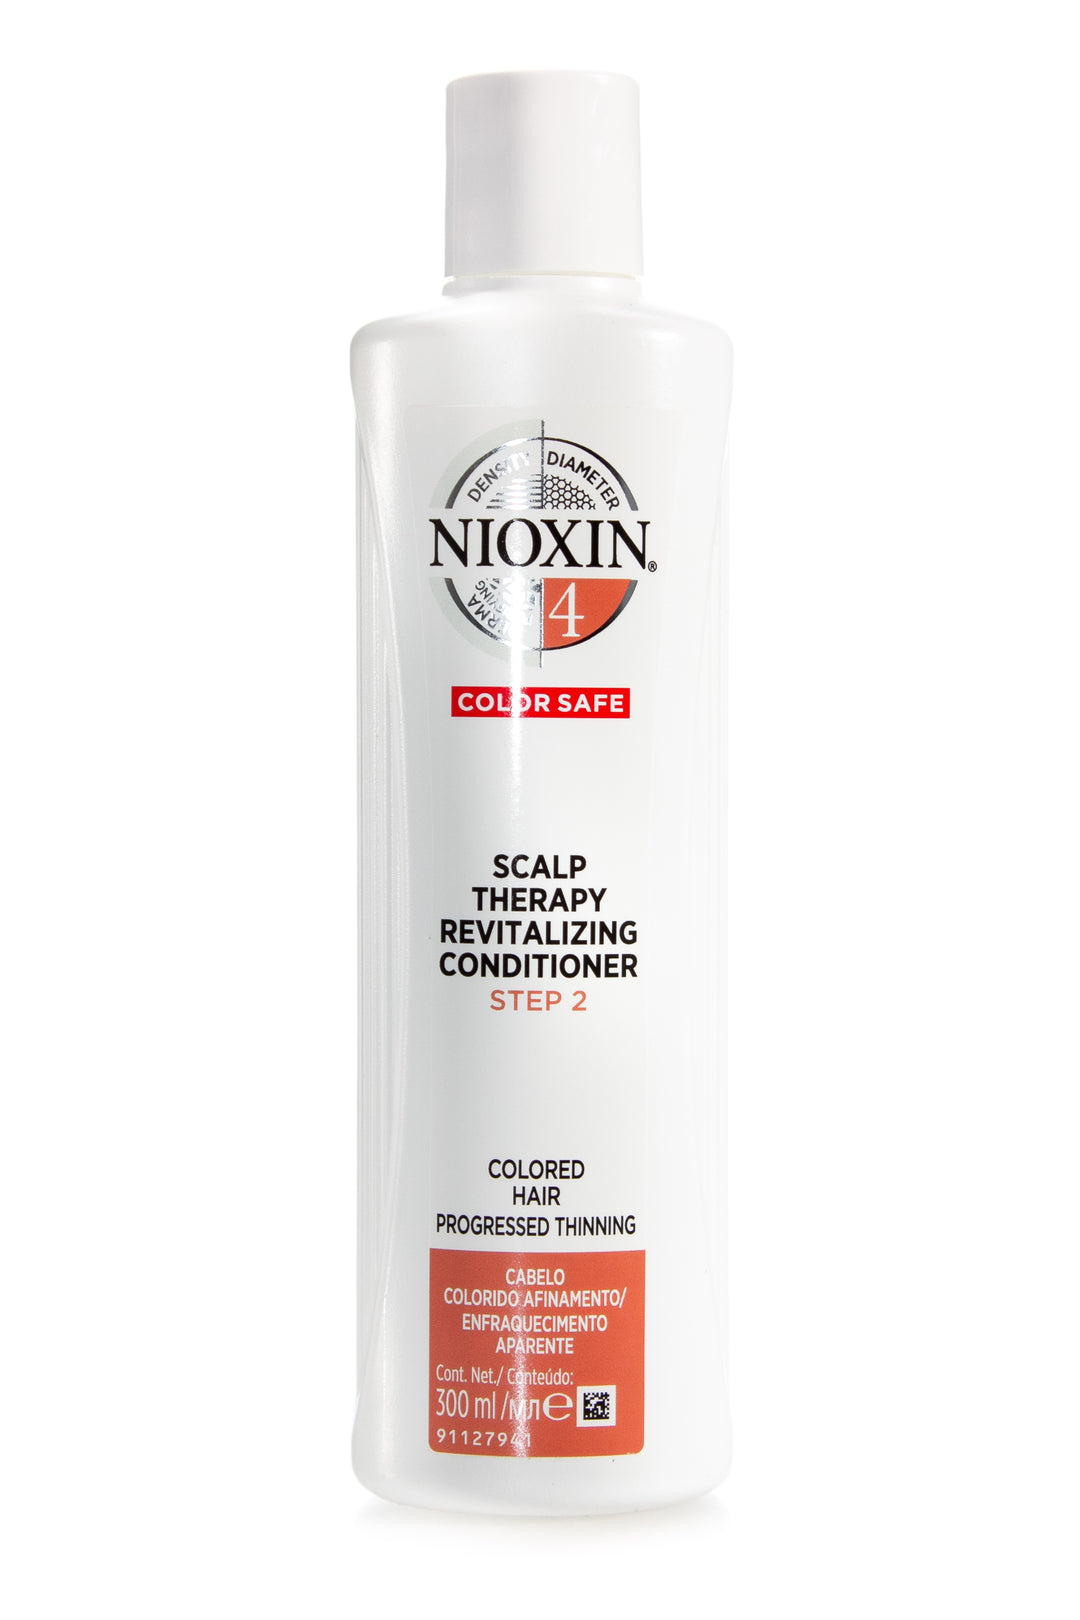 nioxin-system-4-scalp-therapy-revitalizing-conditioner-300ml